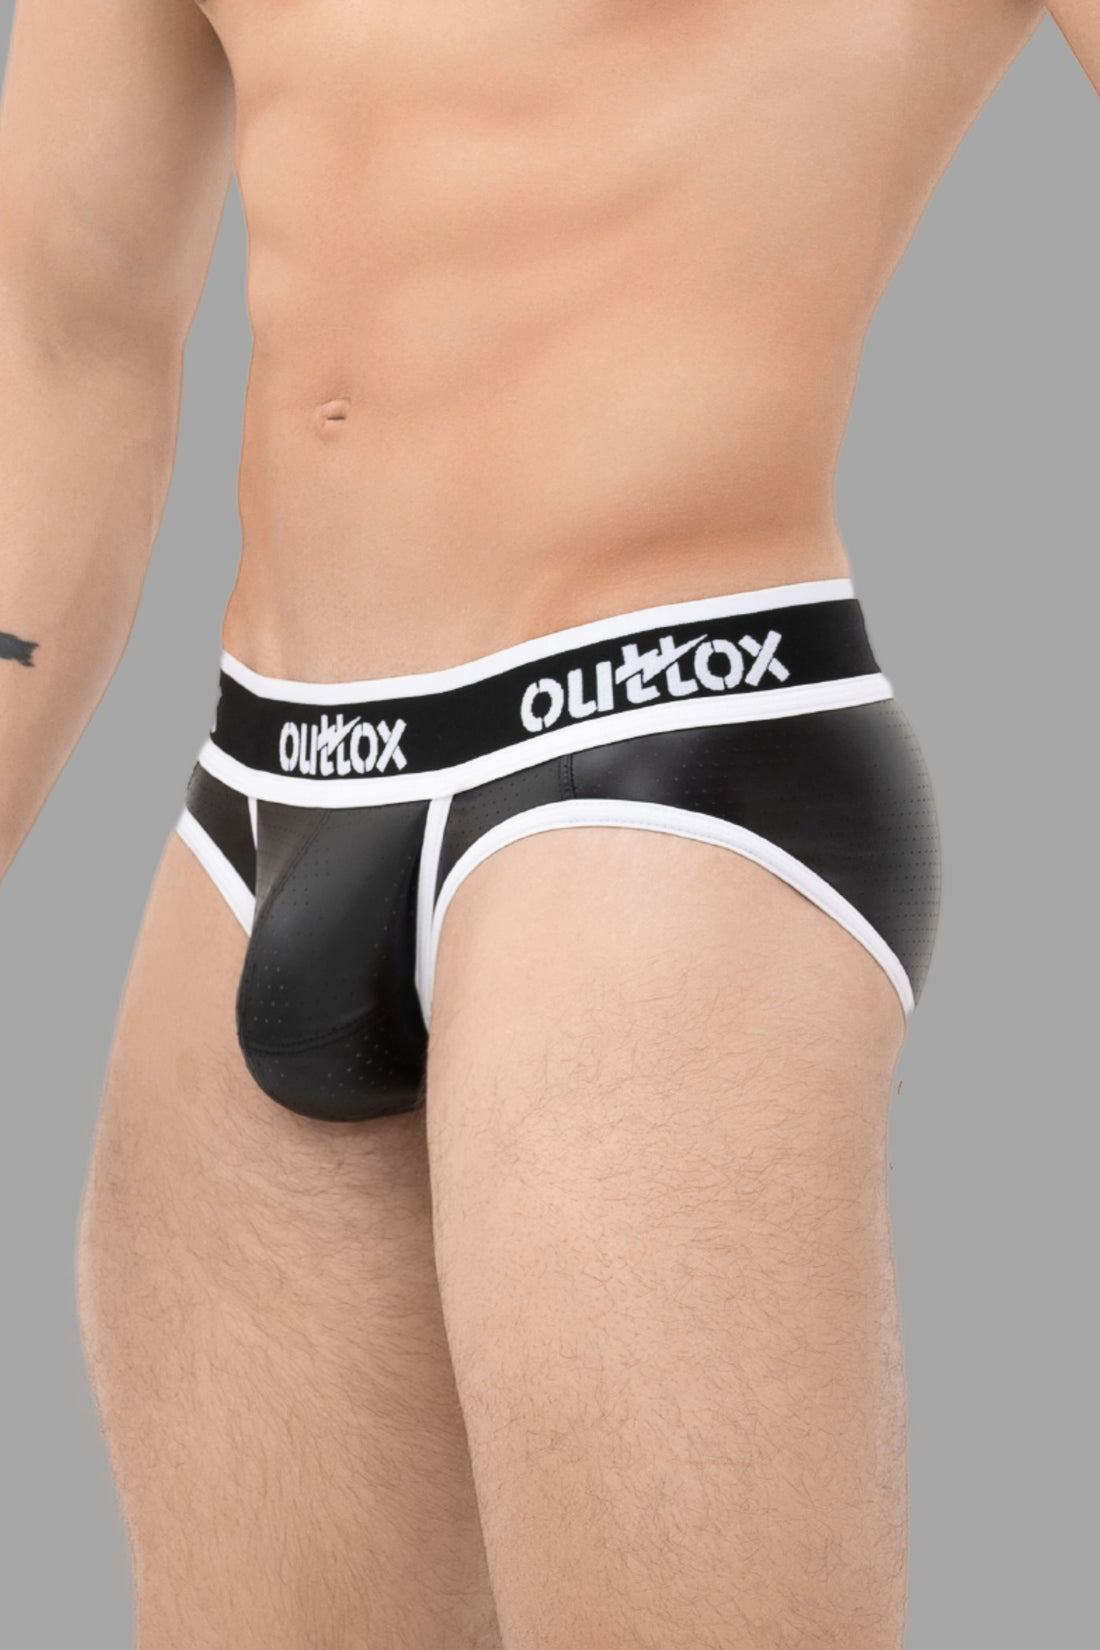 Outtox. Wrapped Rear Briefs with Snap Codpiece. Black+White